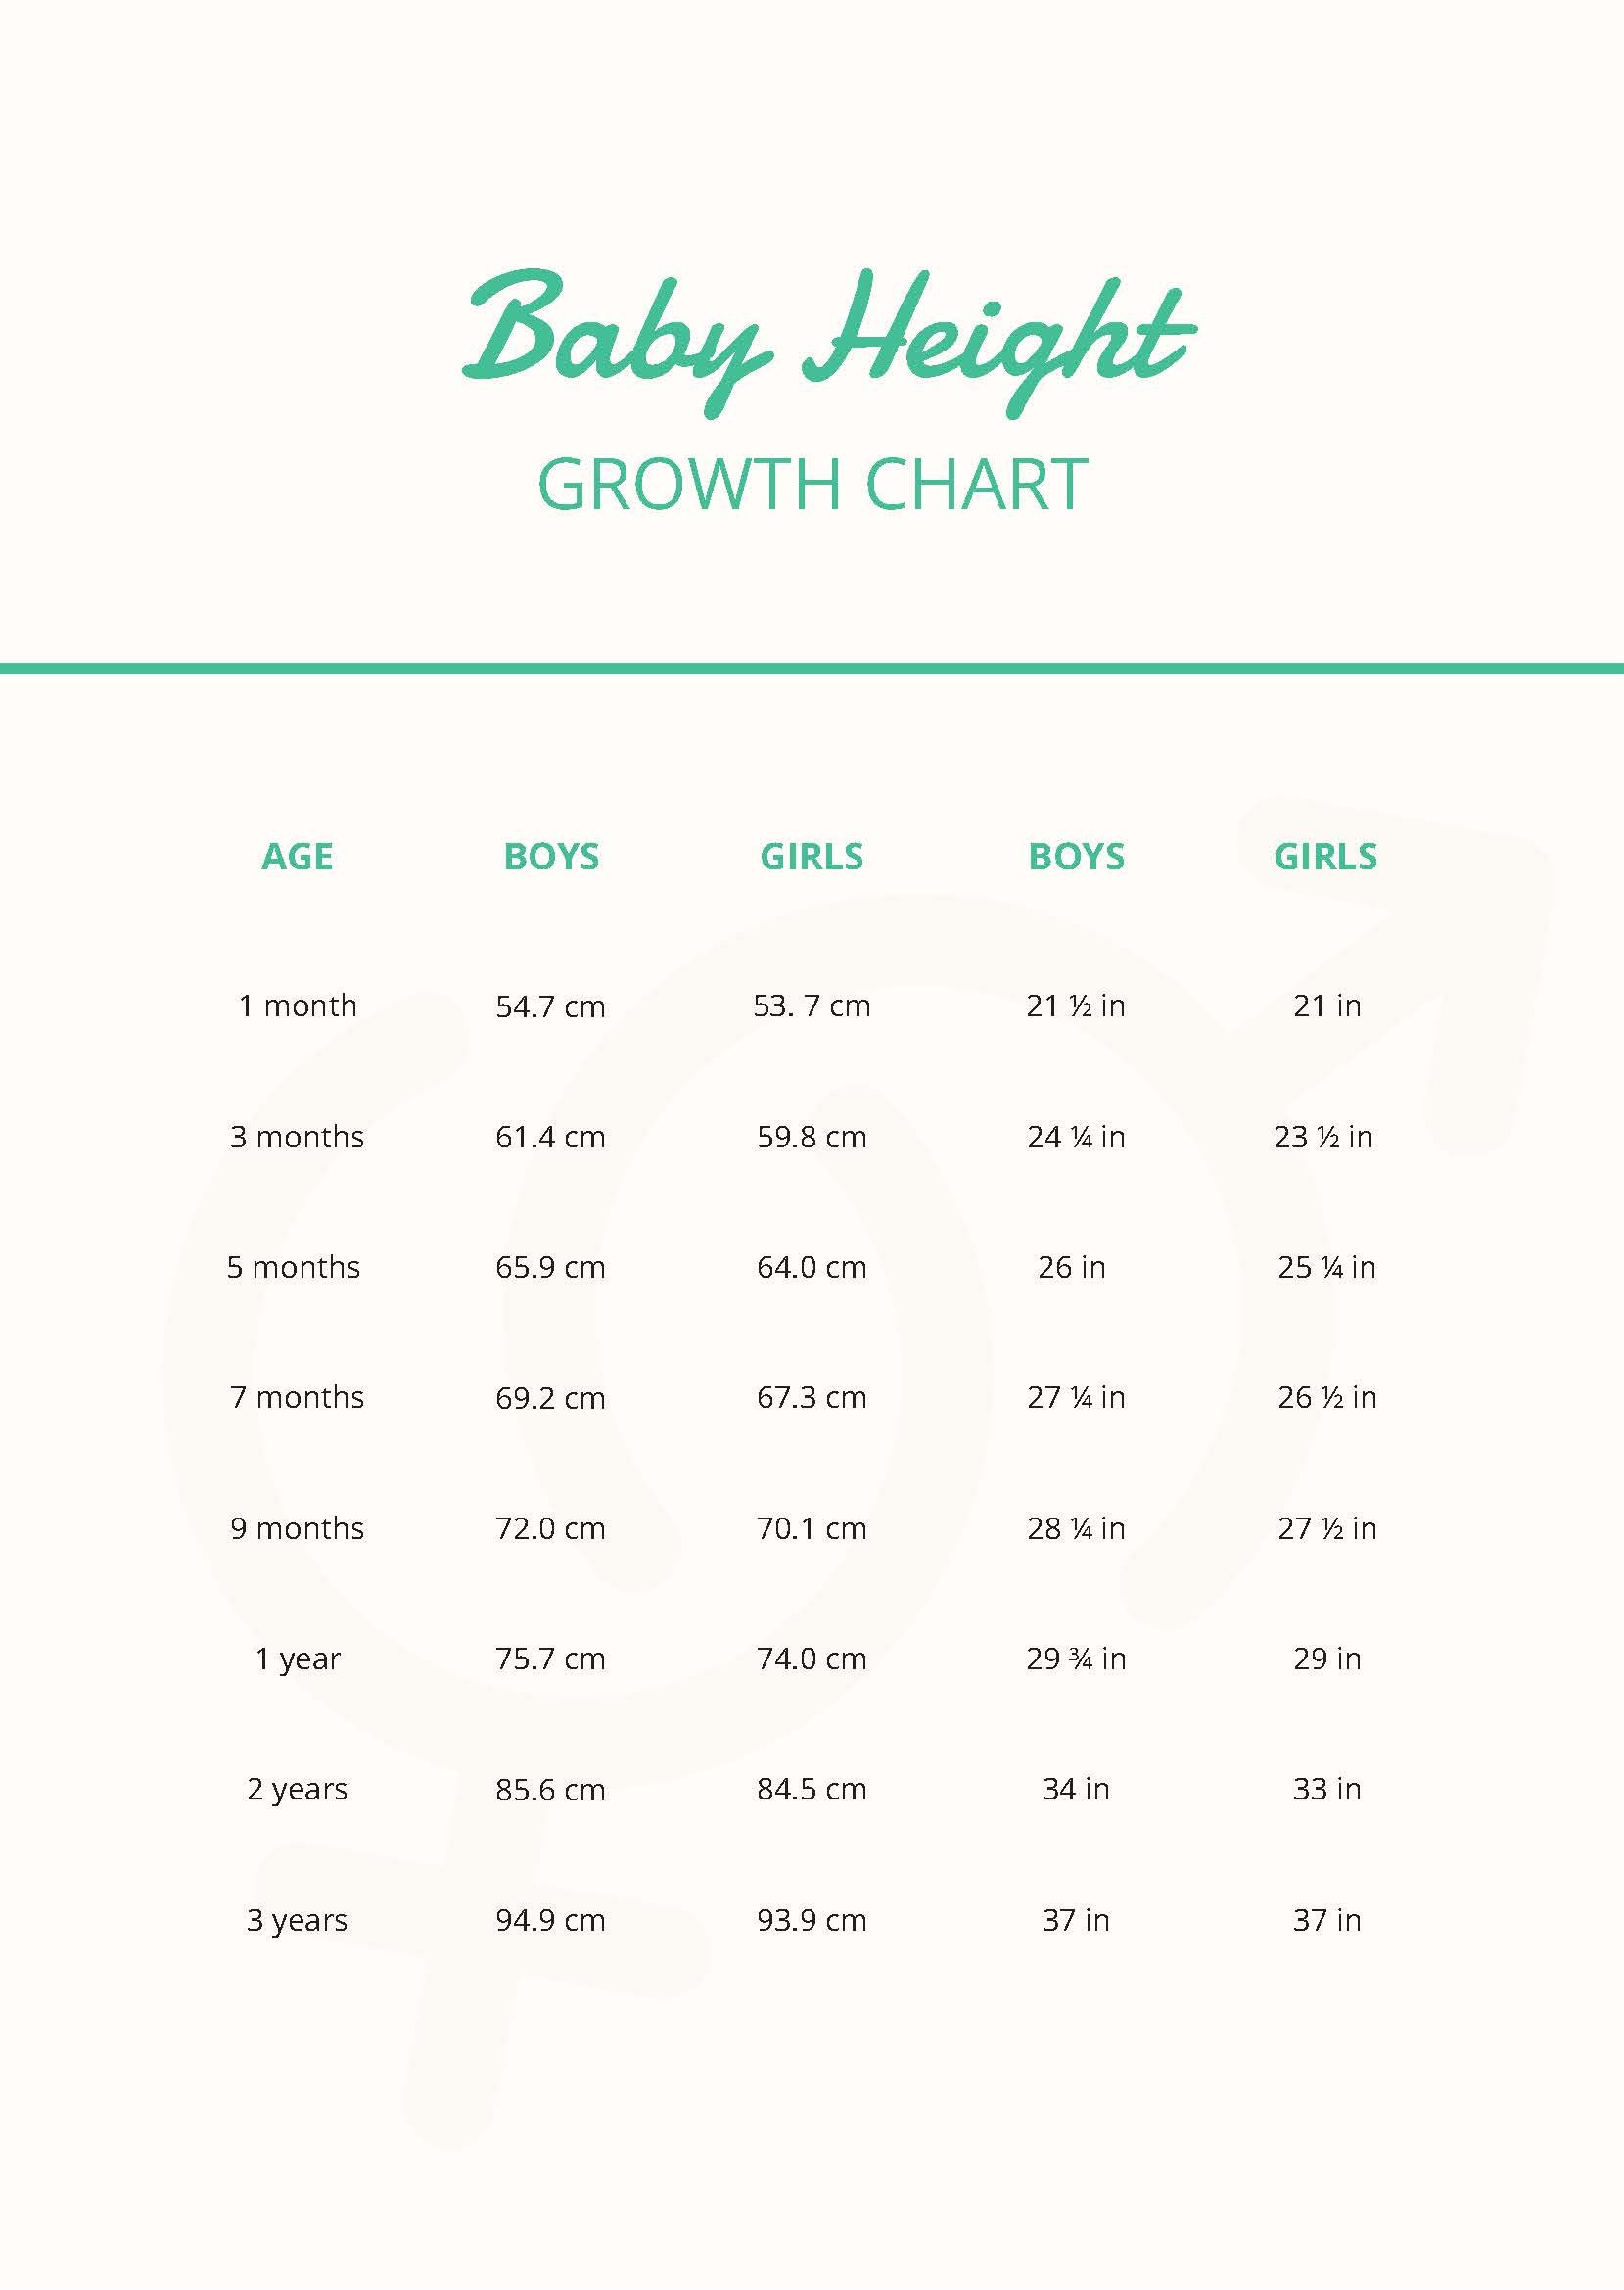 Baby Height Growth Chart